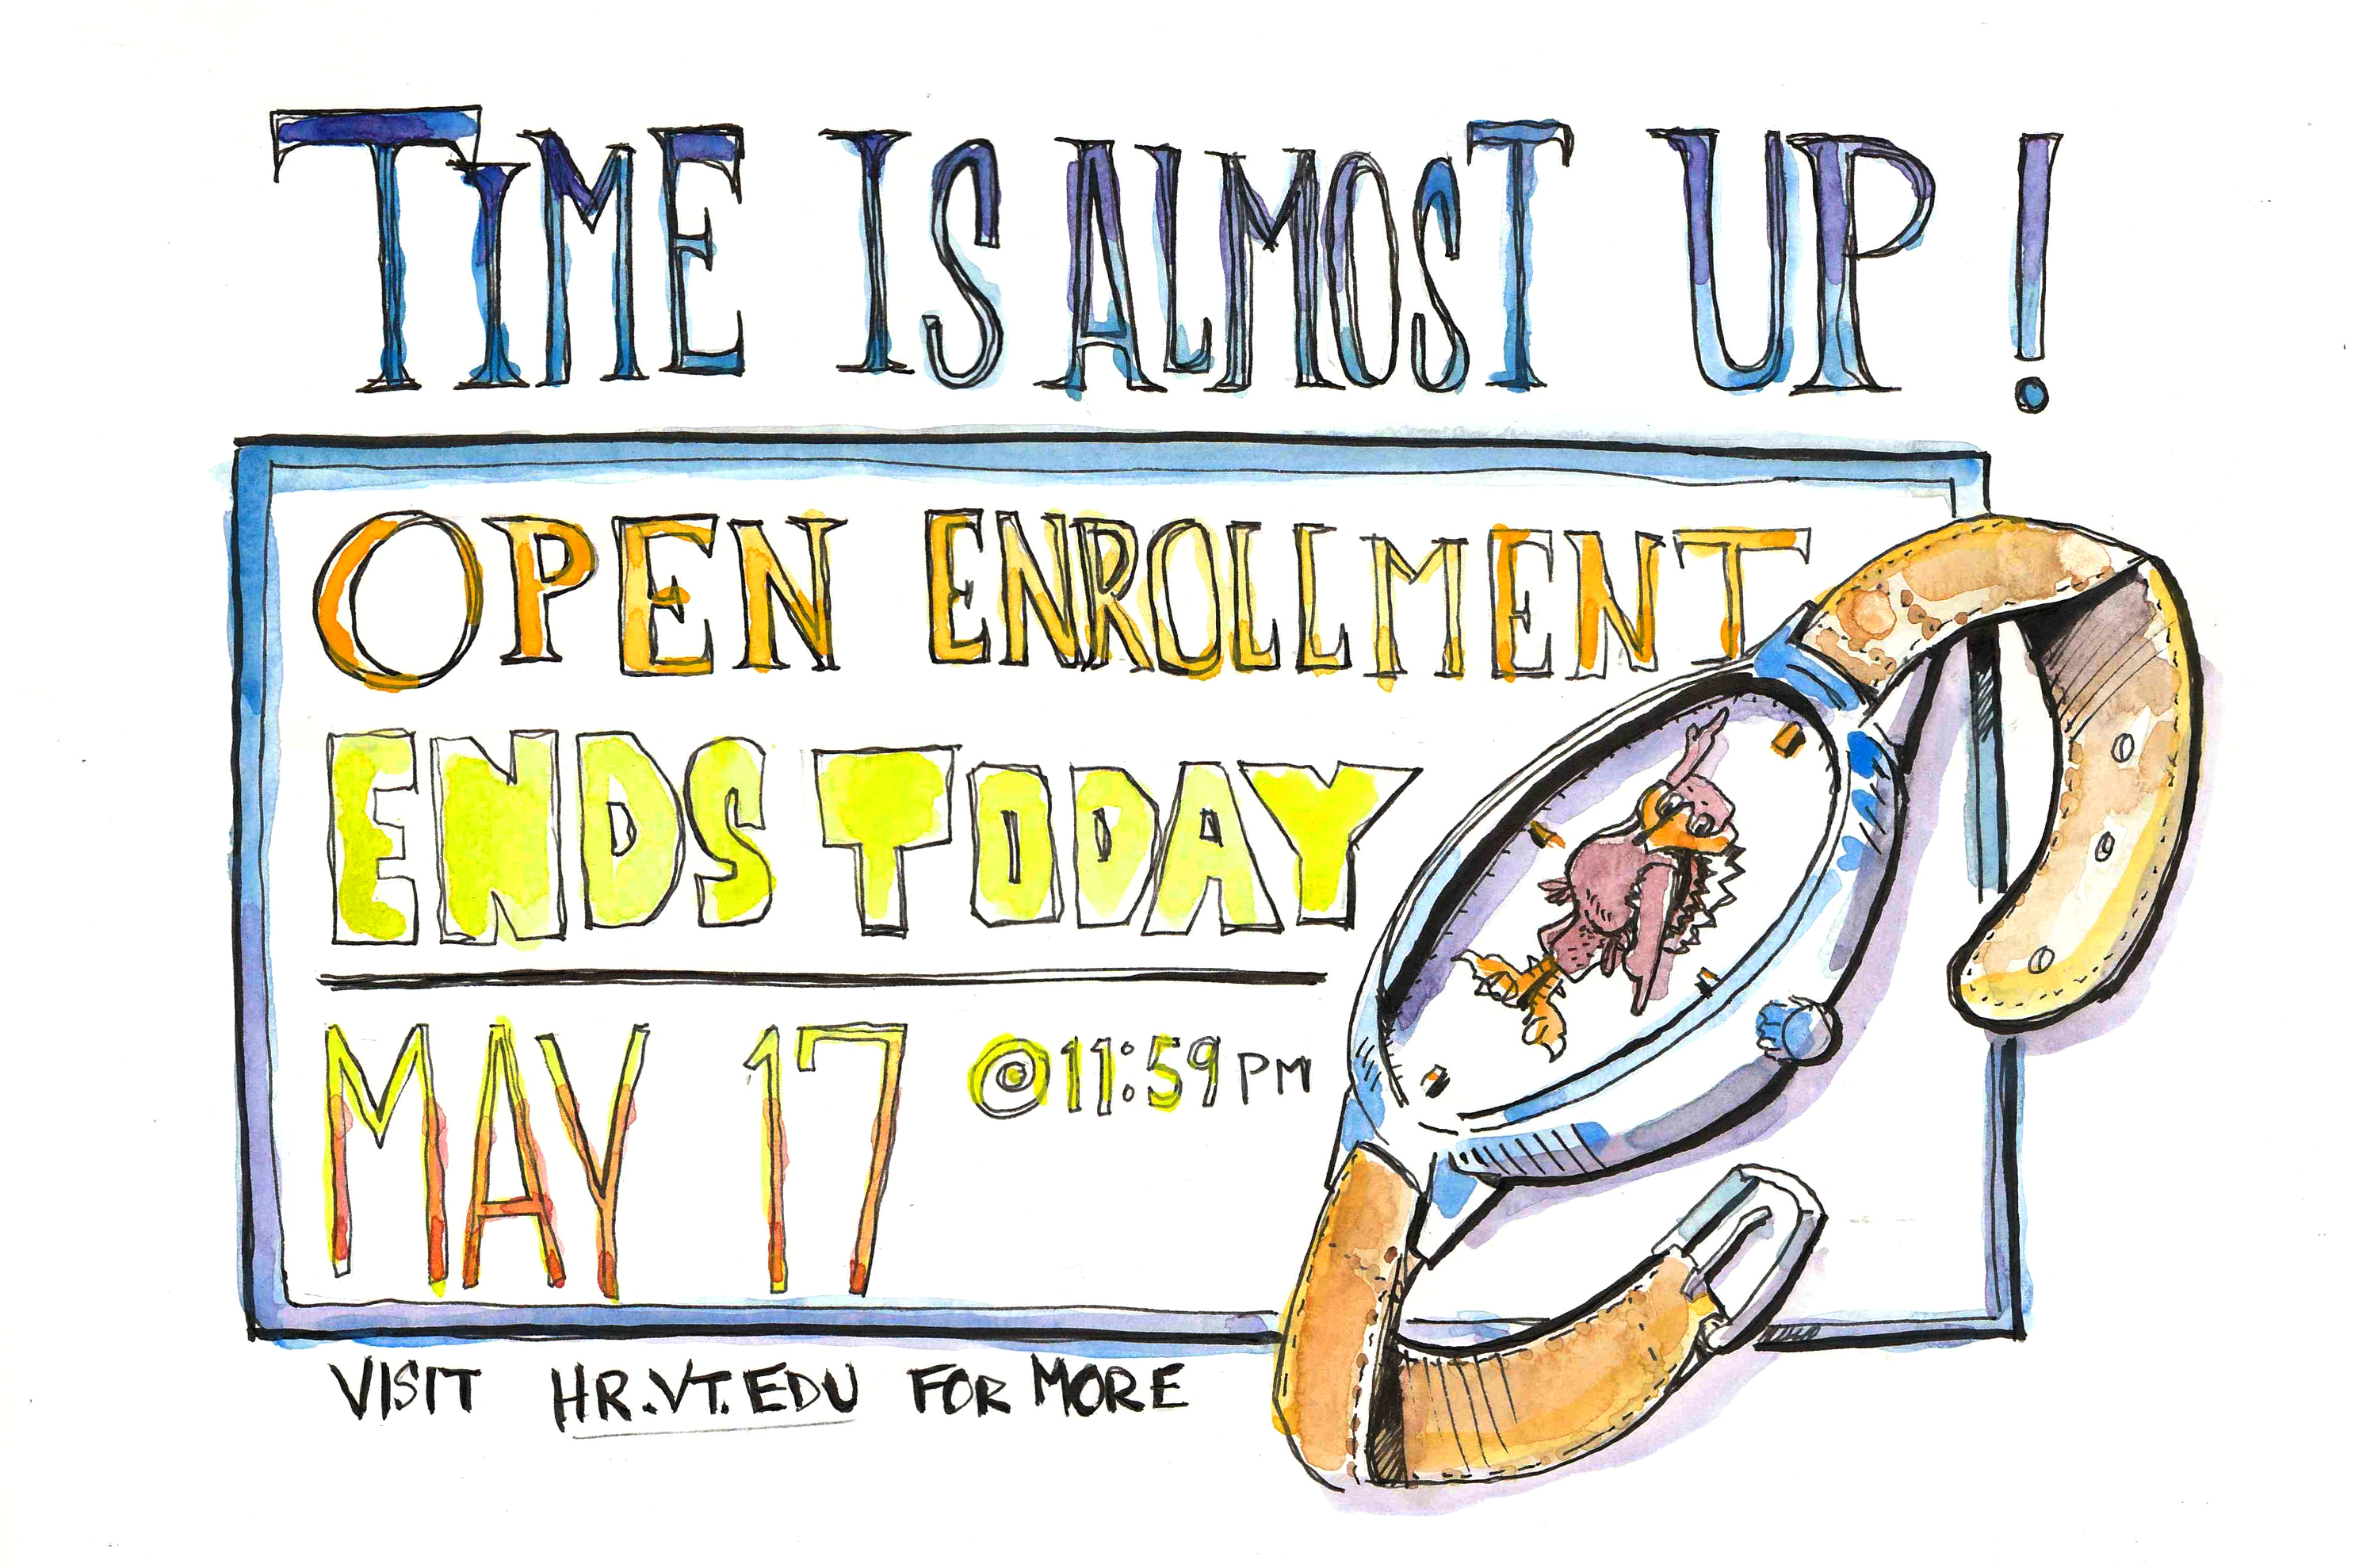 Open Enrollment Ends Today (00182) -- Appeared on May 17, 2021